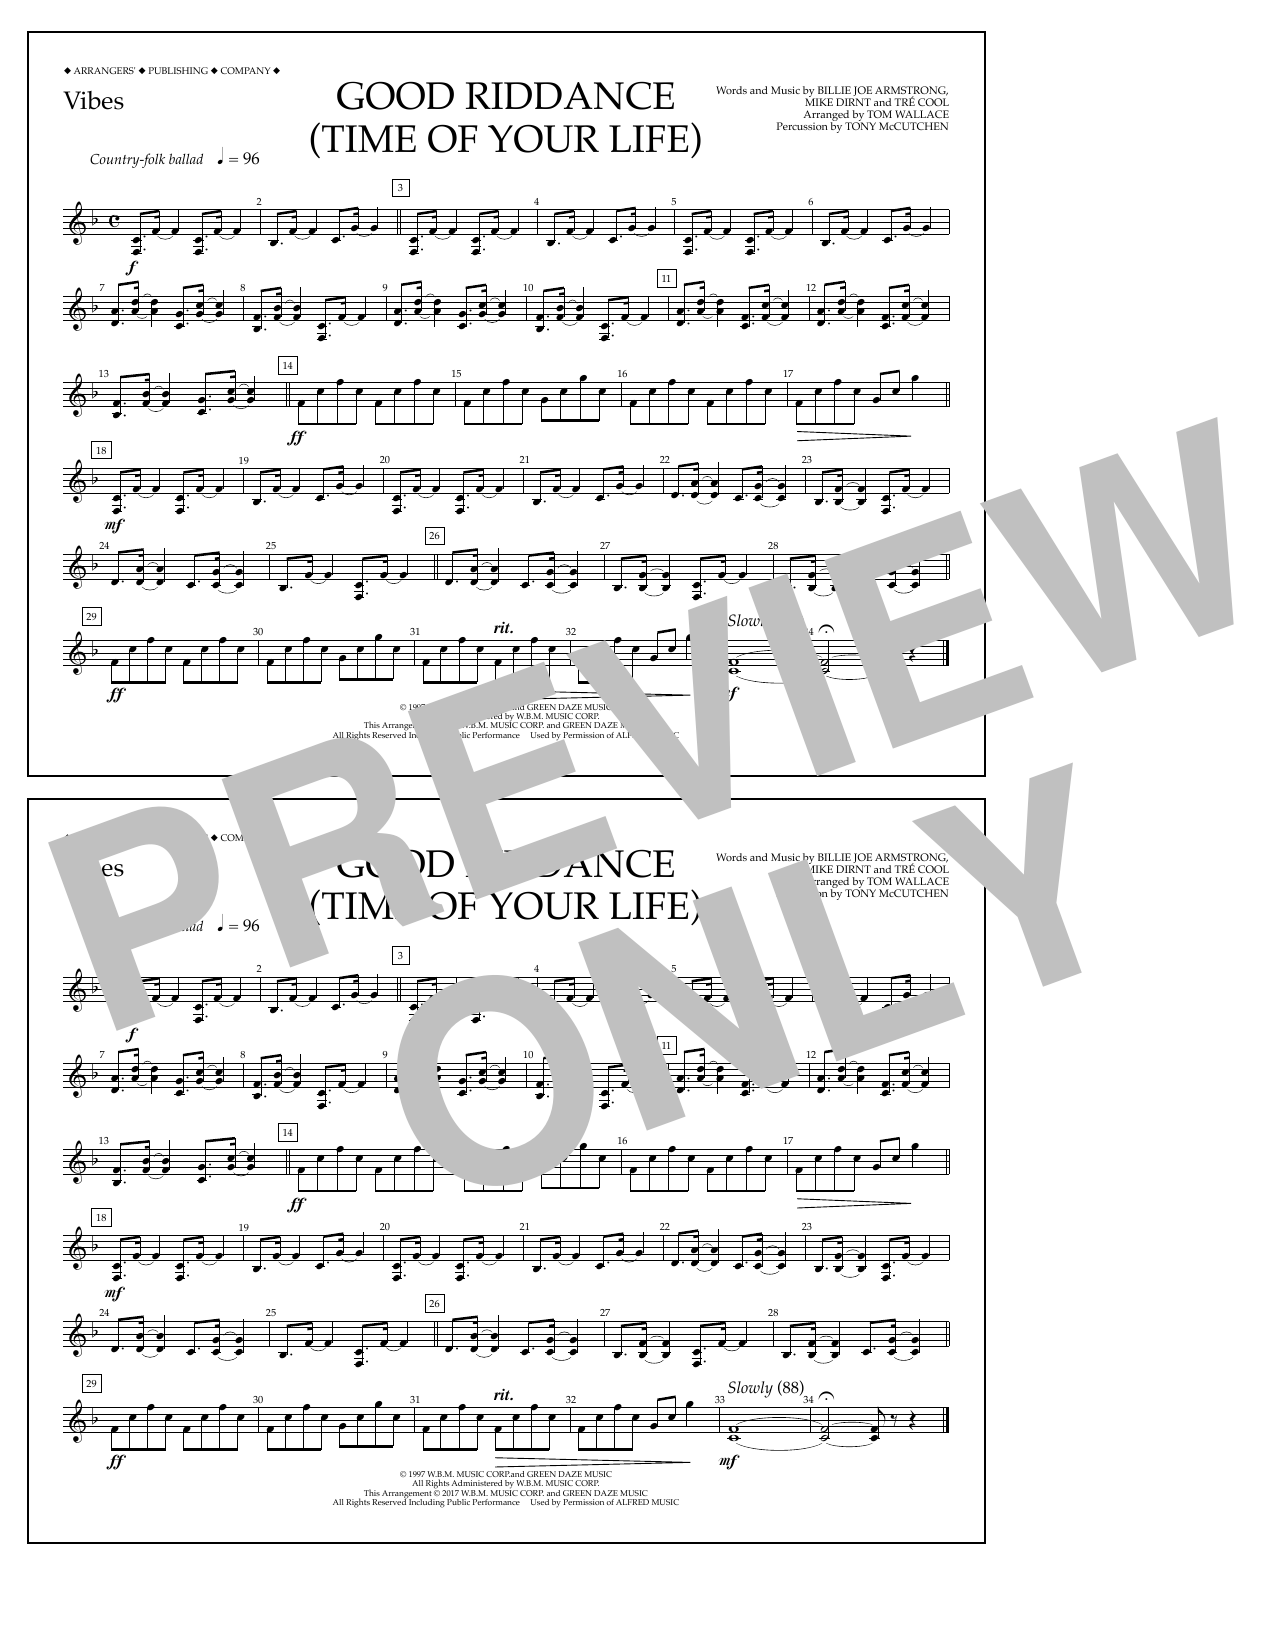 Download Tom Wallace Good Riddance (Time of Your Life) - Vib Sheet Music